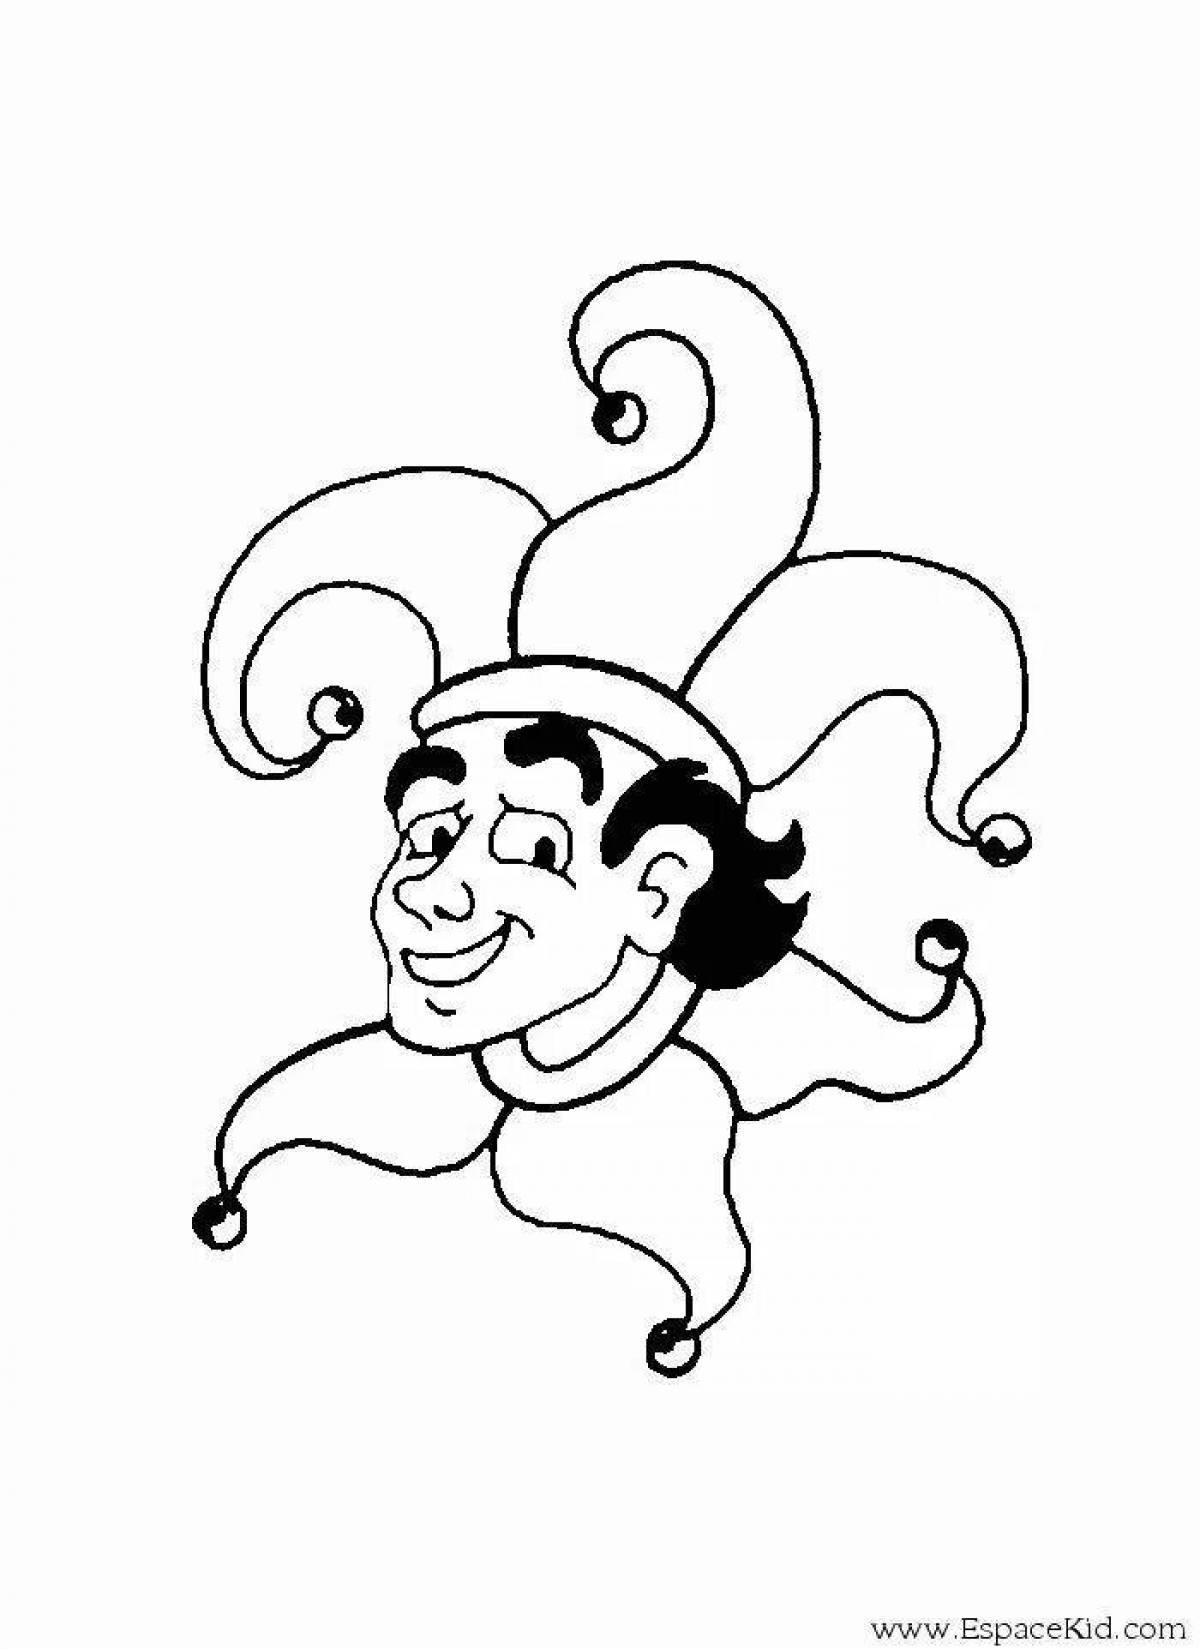 Fearless jester coloring page